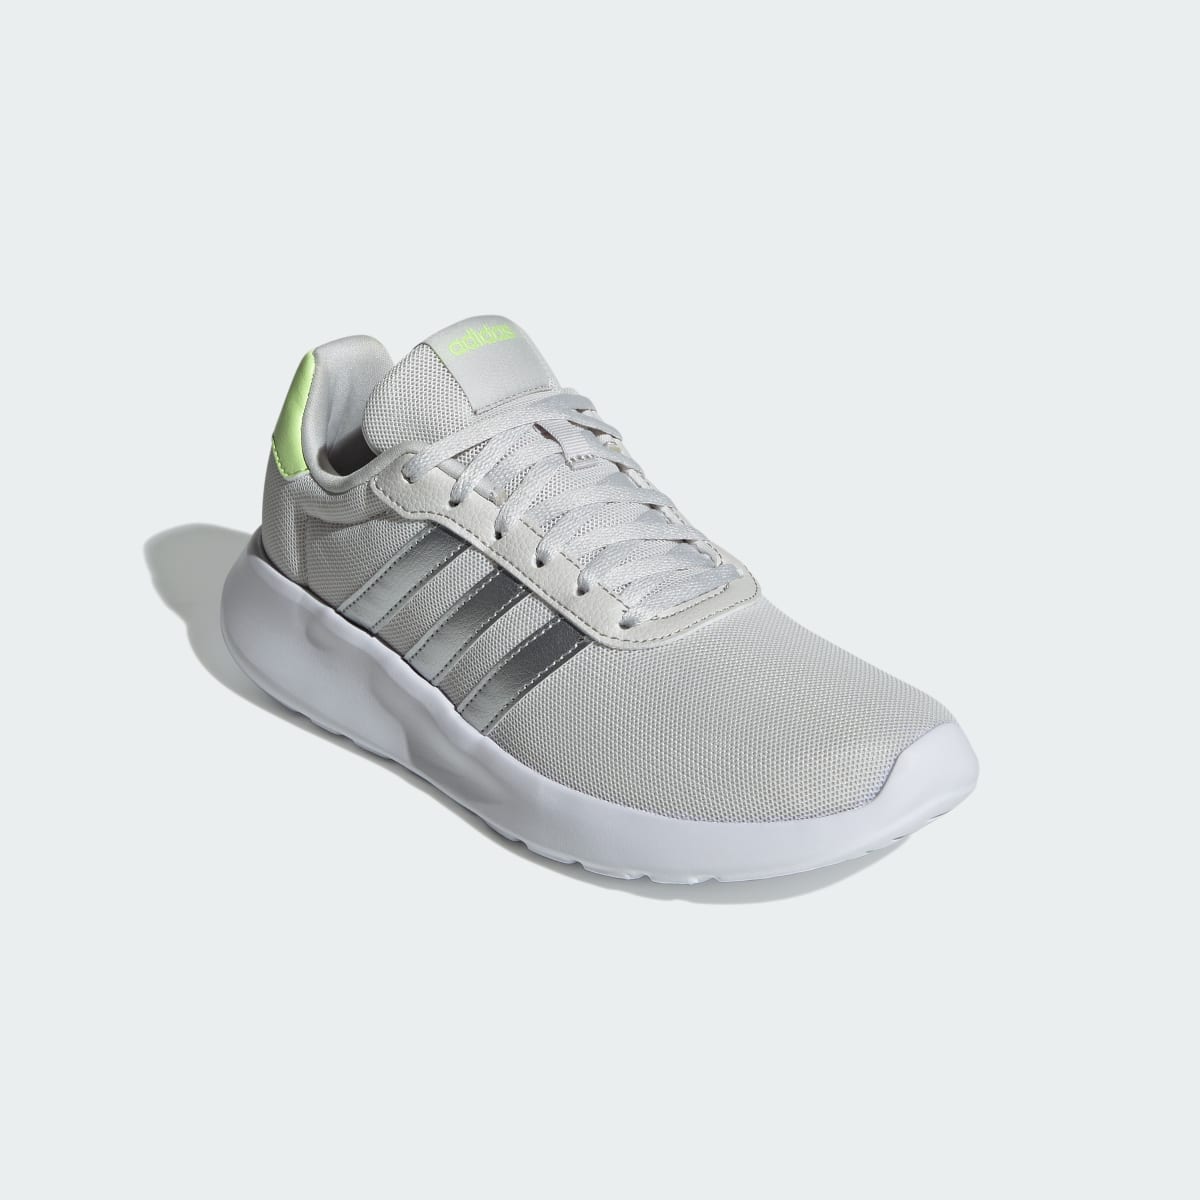 Adidas Lite Racer 3.0 Shoes. 5